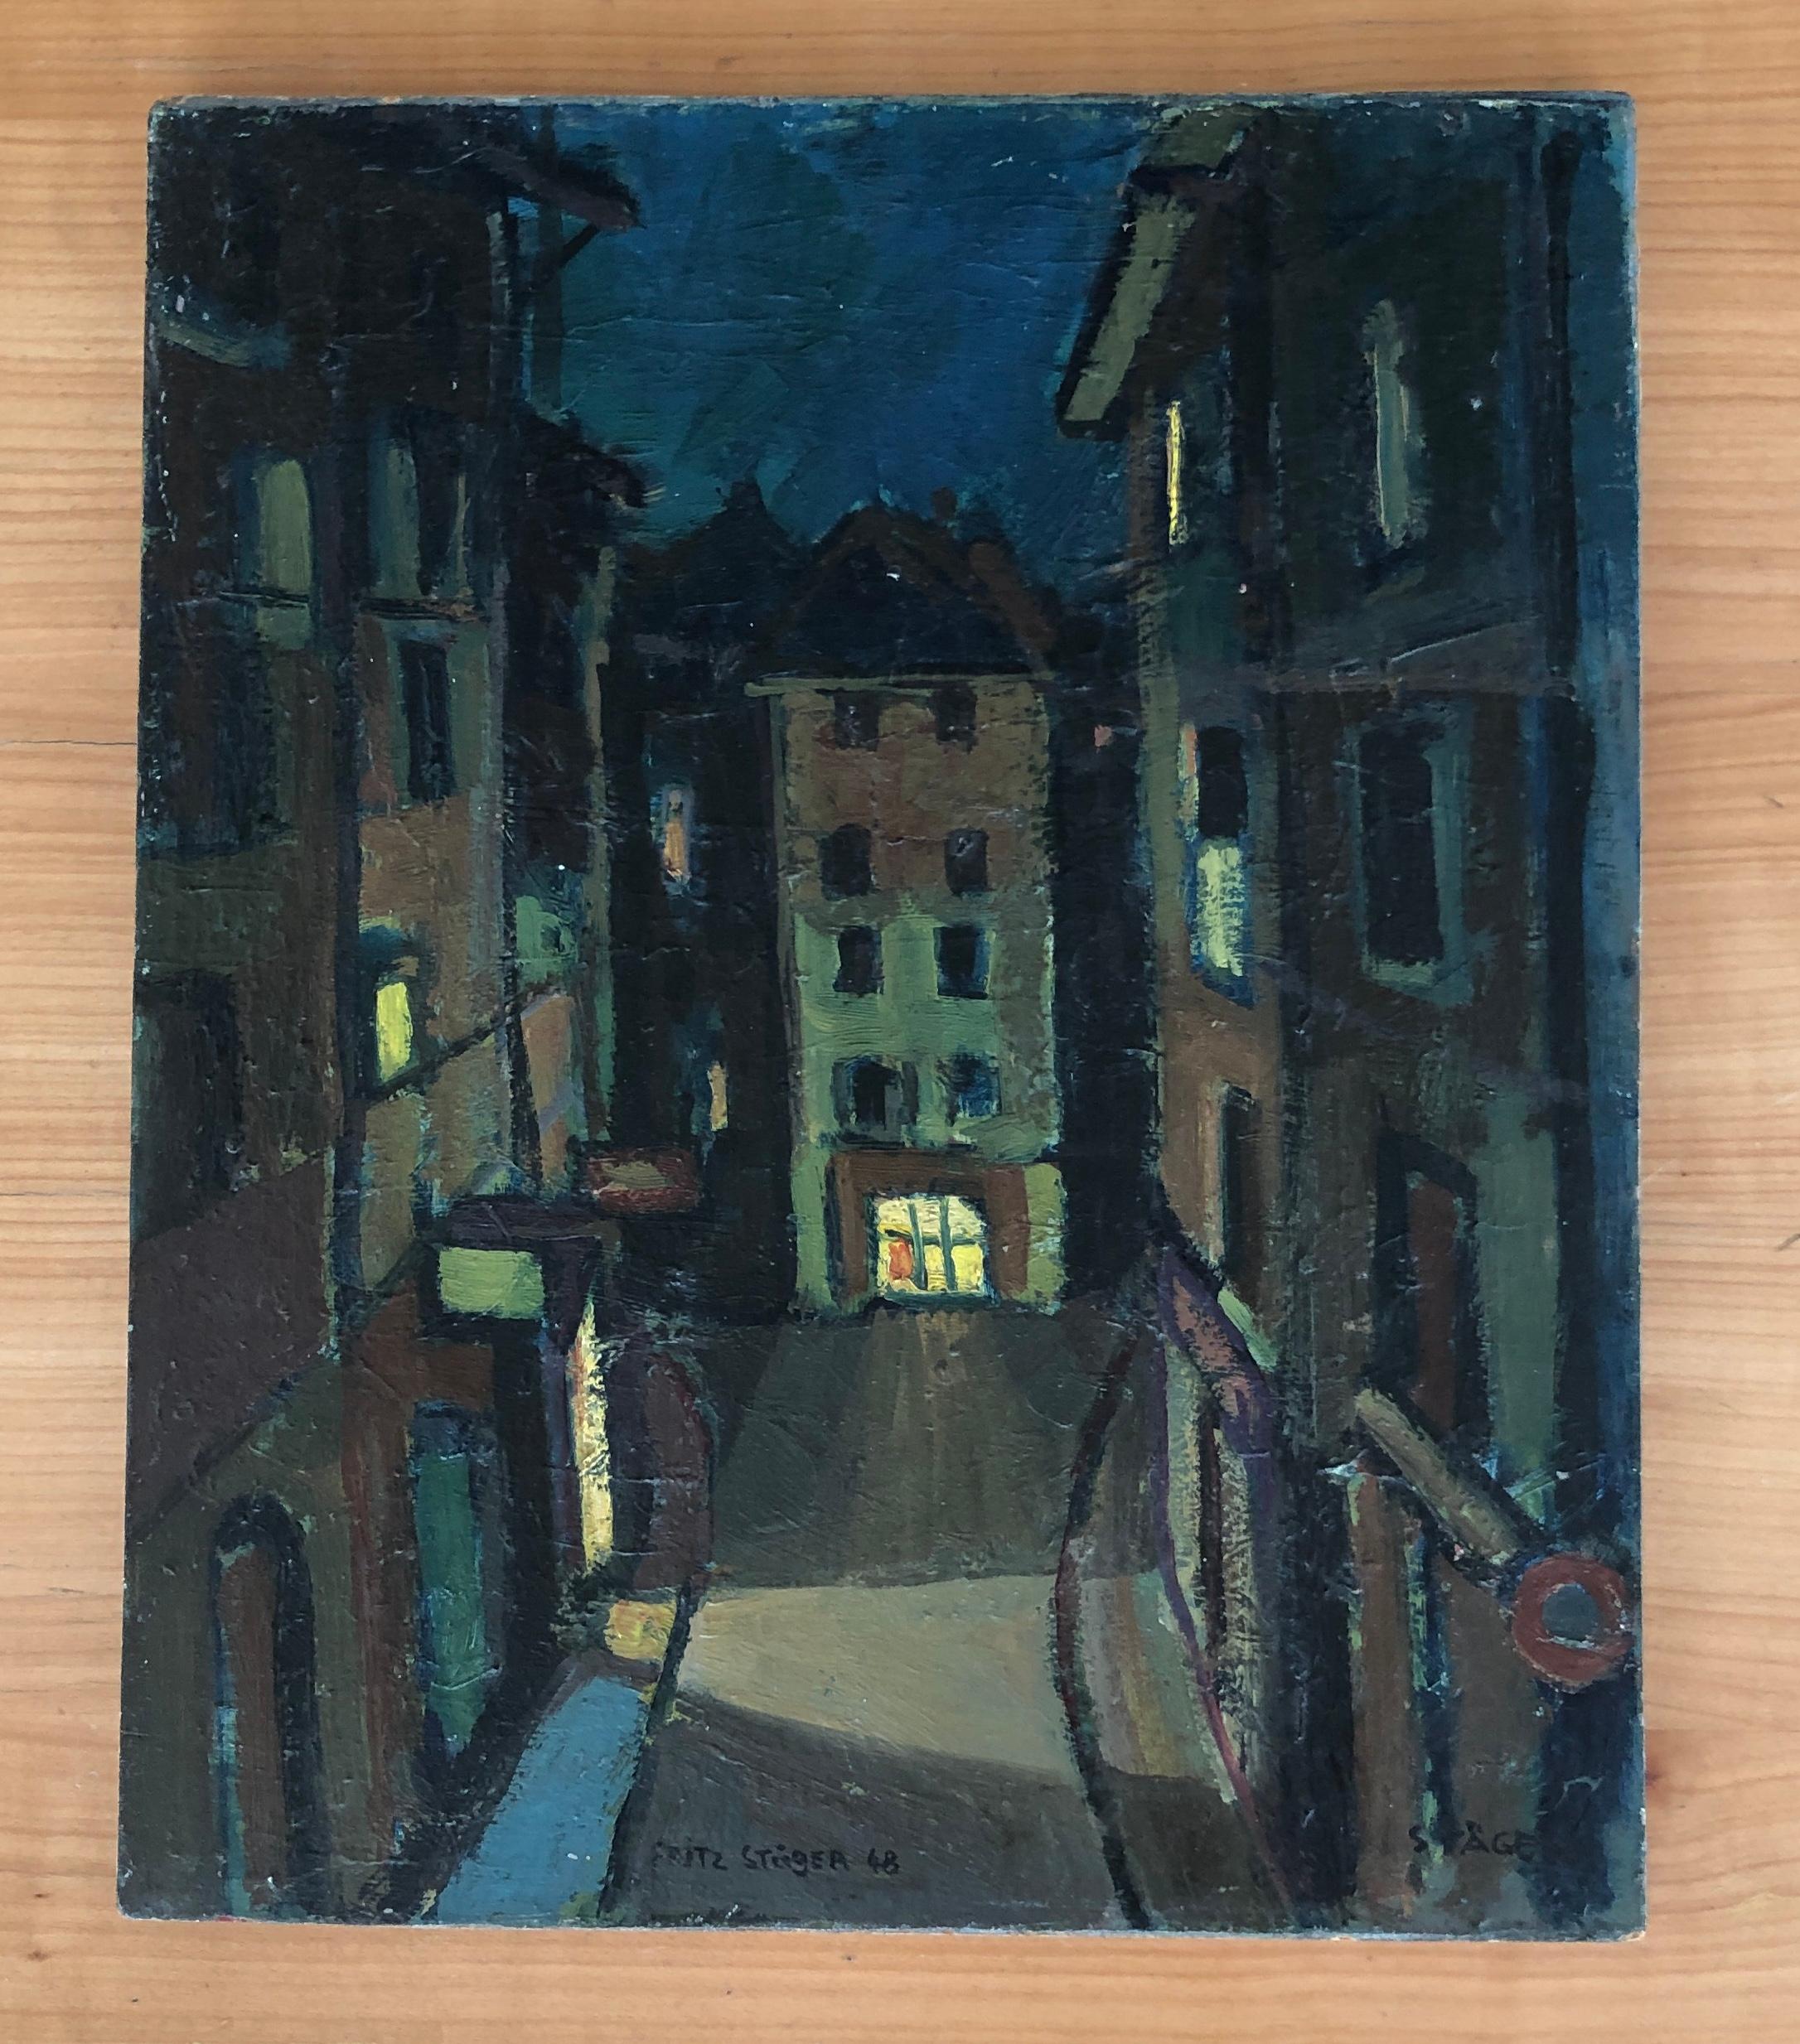 Night on the porch - Painting by Fritz Stäger